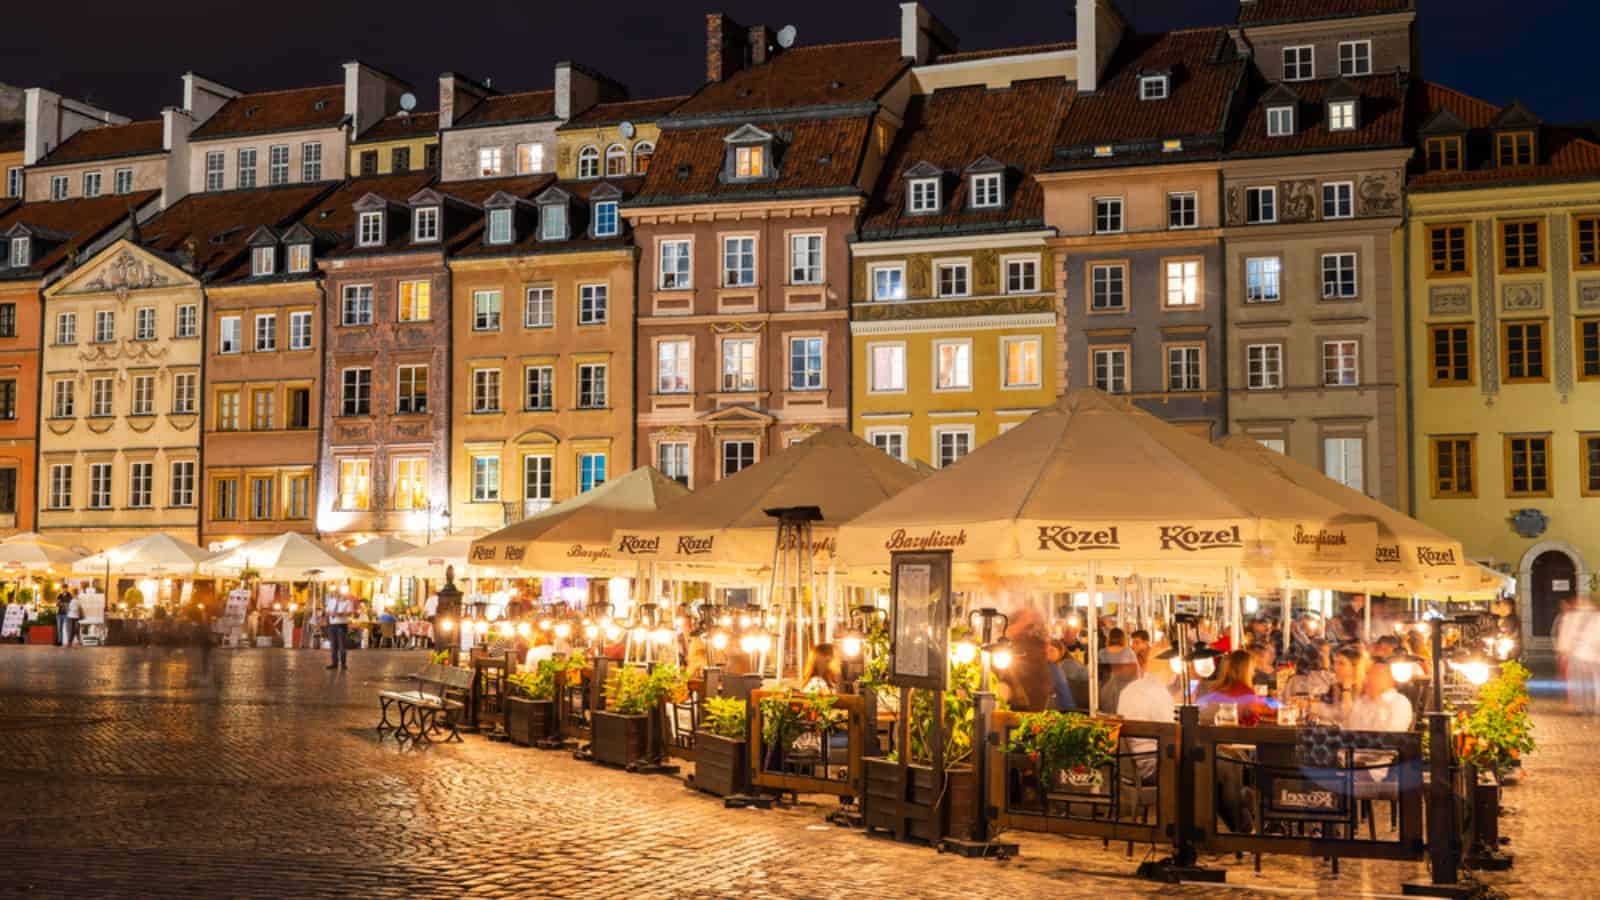 Evening on Old Town Market Square in Warsaw